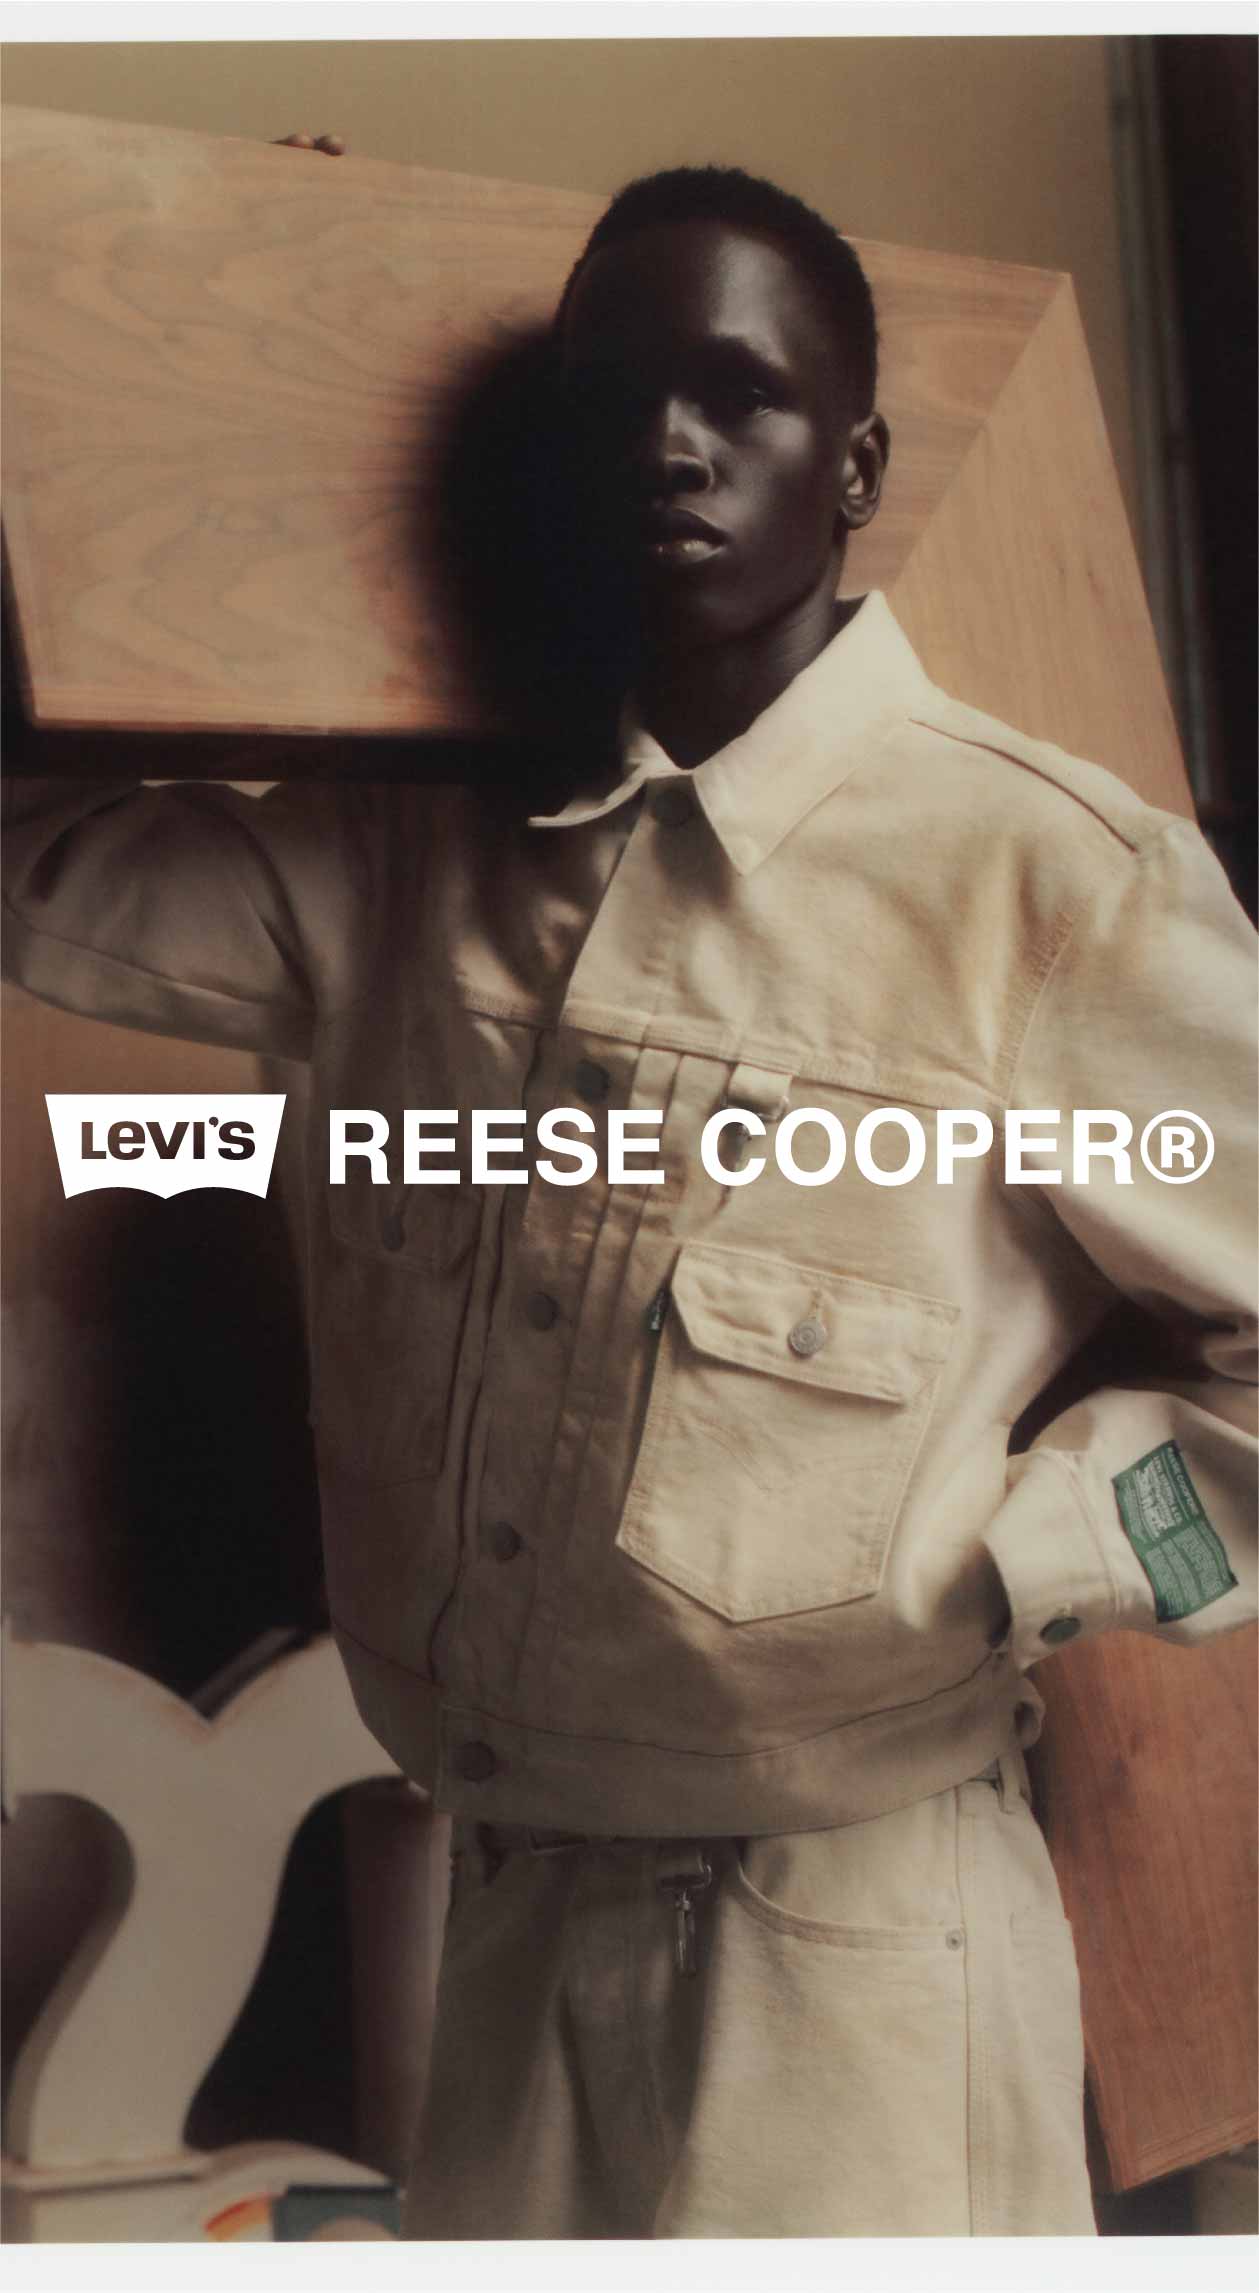 Reese Cooper x Levi's Collaboration